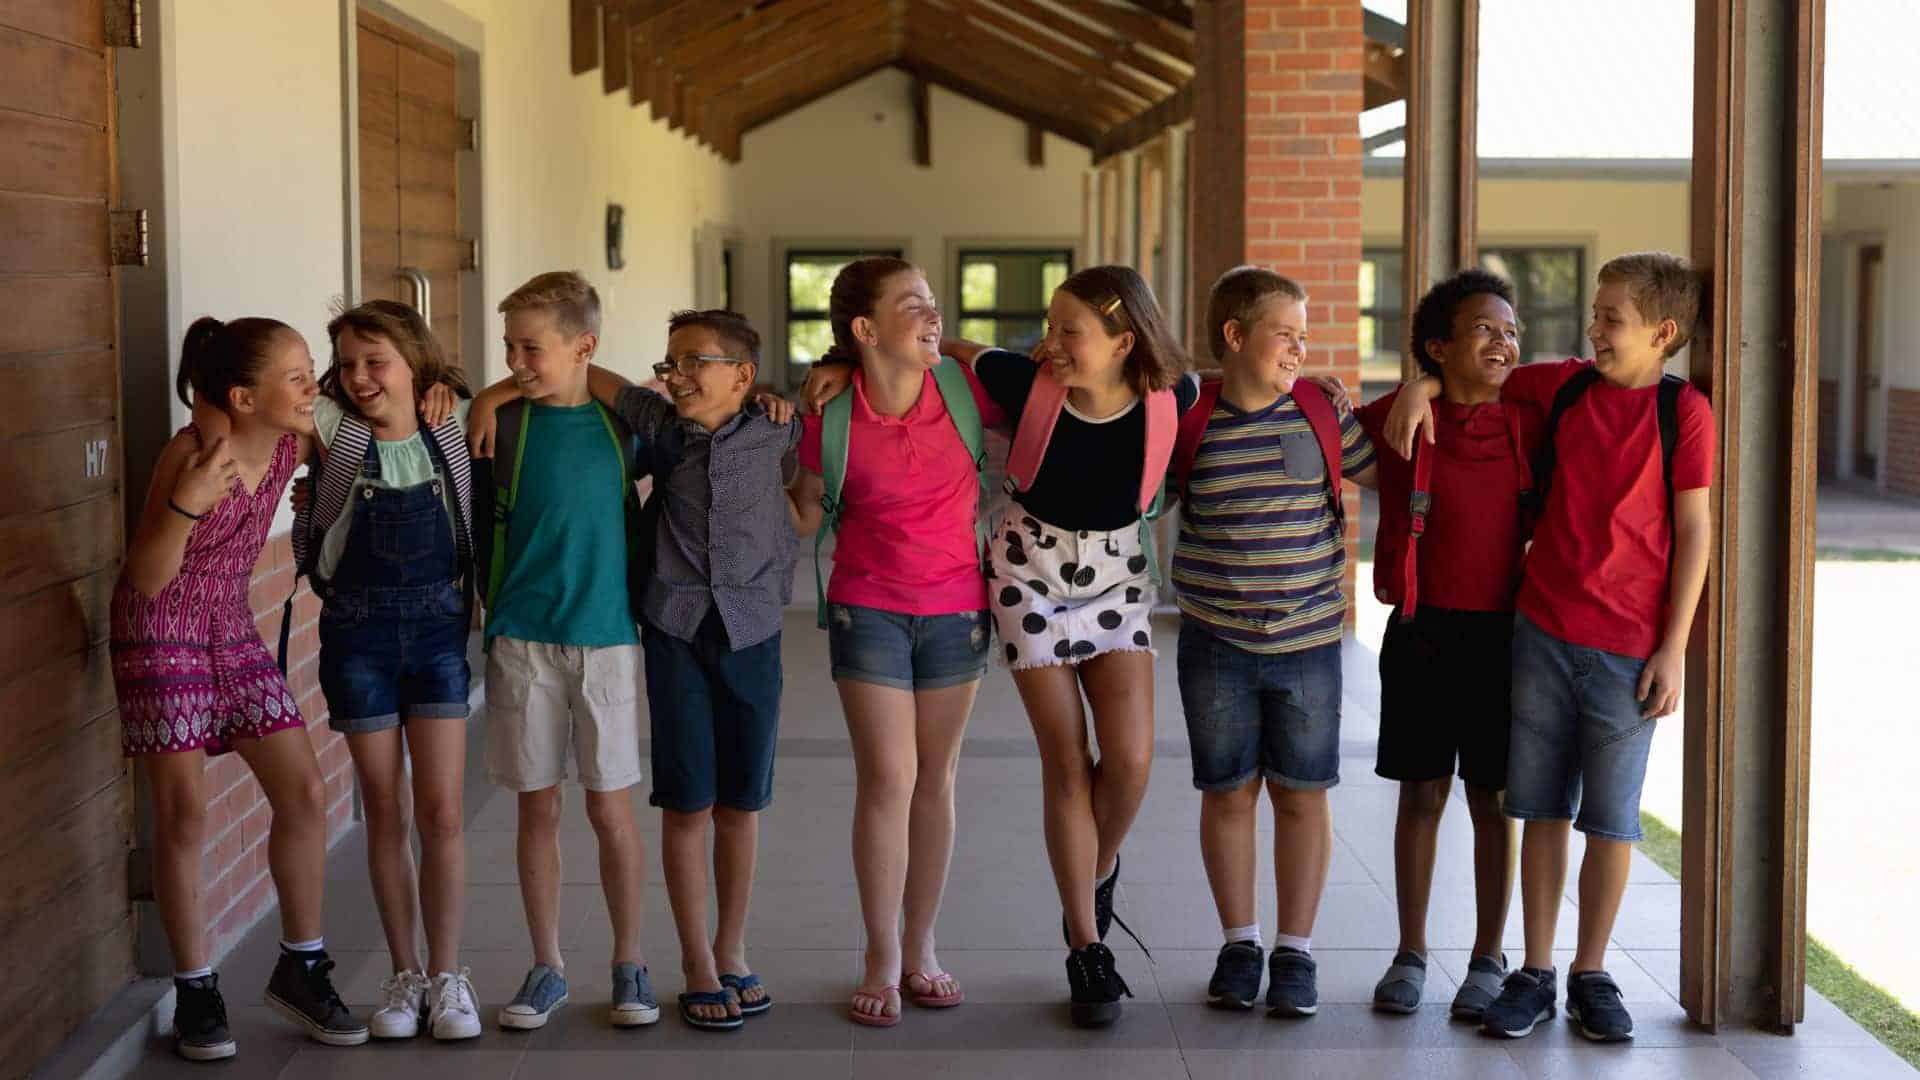 School children standing in a line putting their arms around each other's shoulders